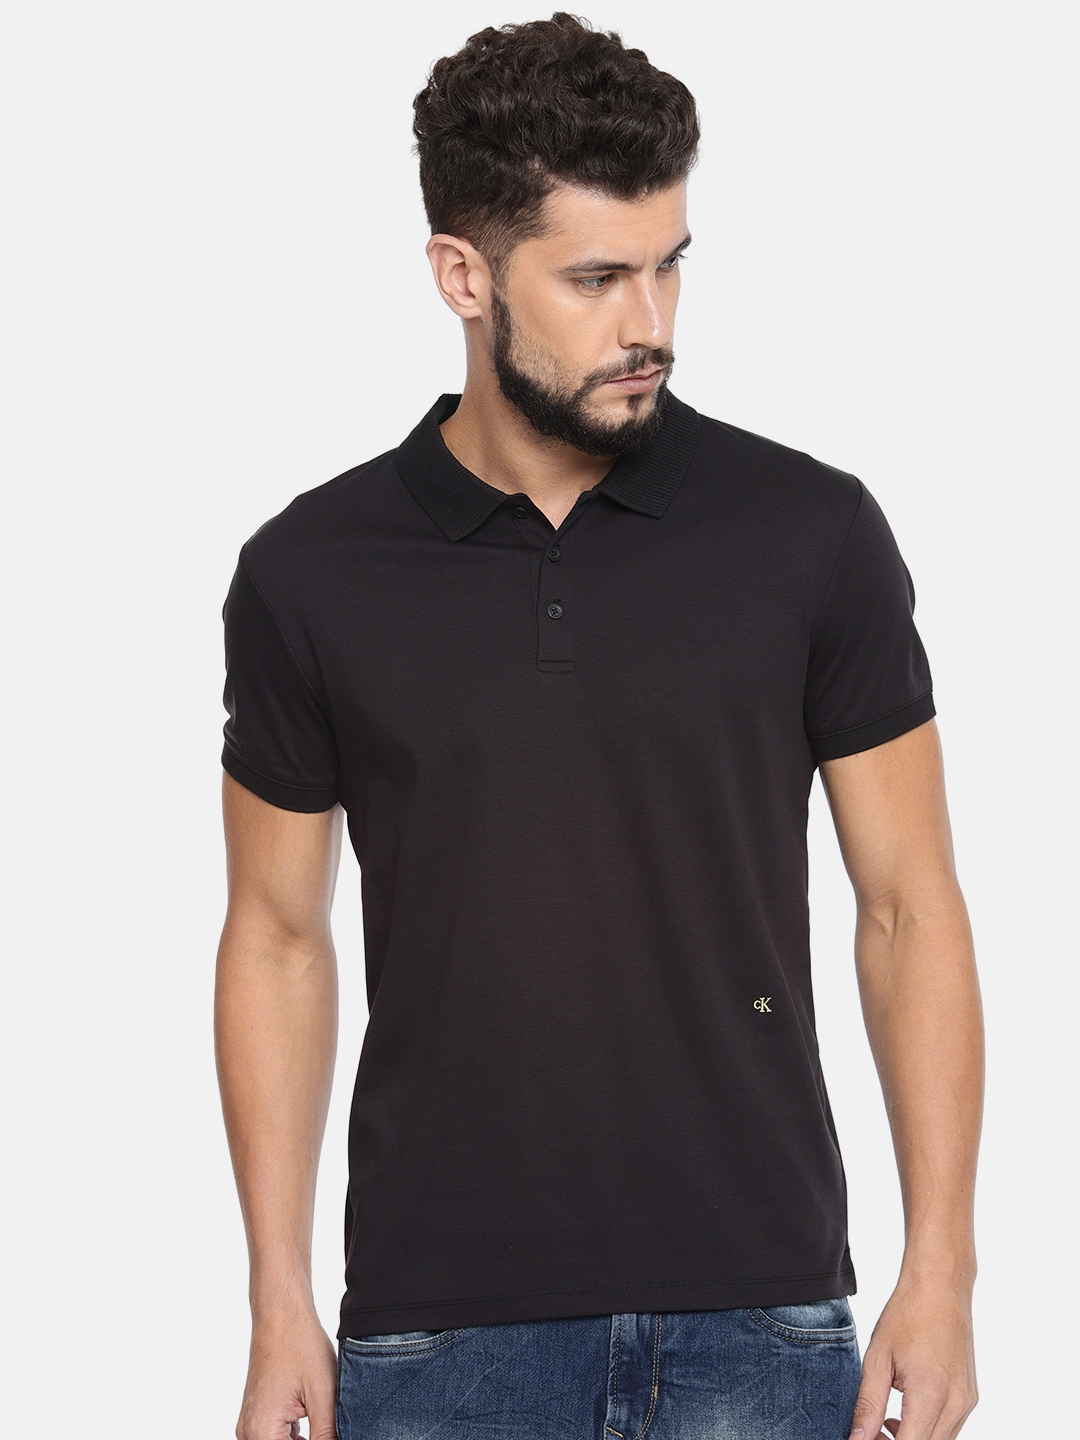 Buy Klein Jeans Men Black Solid Polo Collar Cotton T Tshirts for Men 8516981 | Myntra